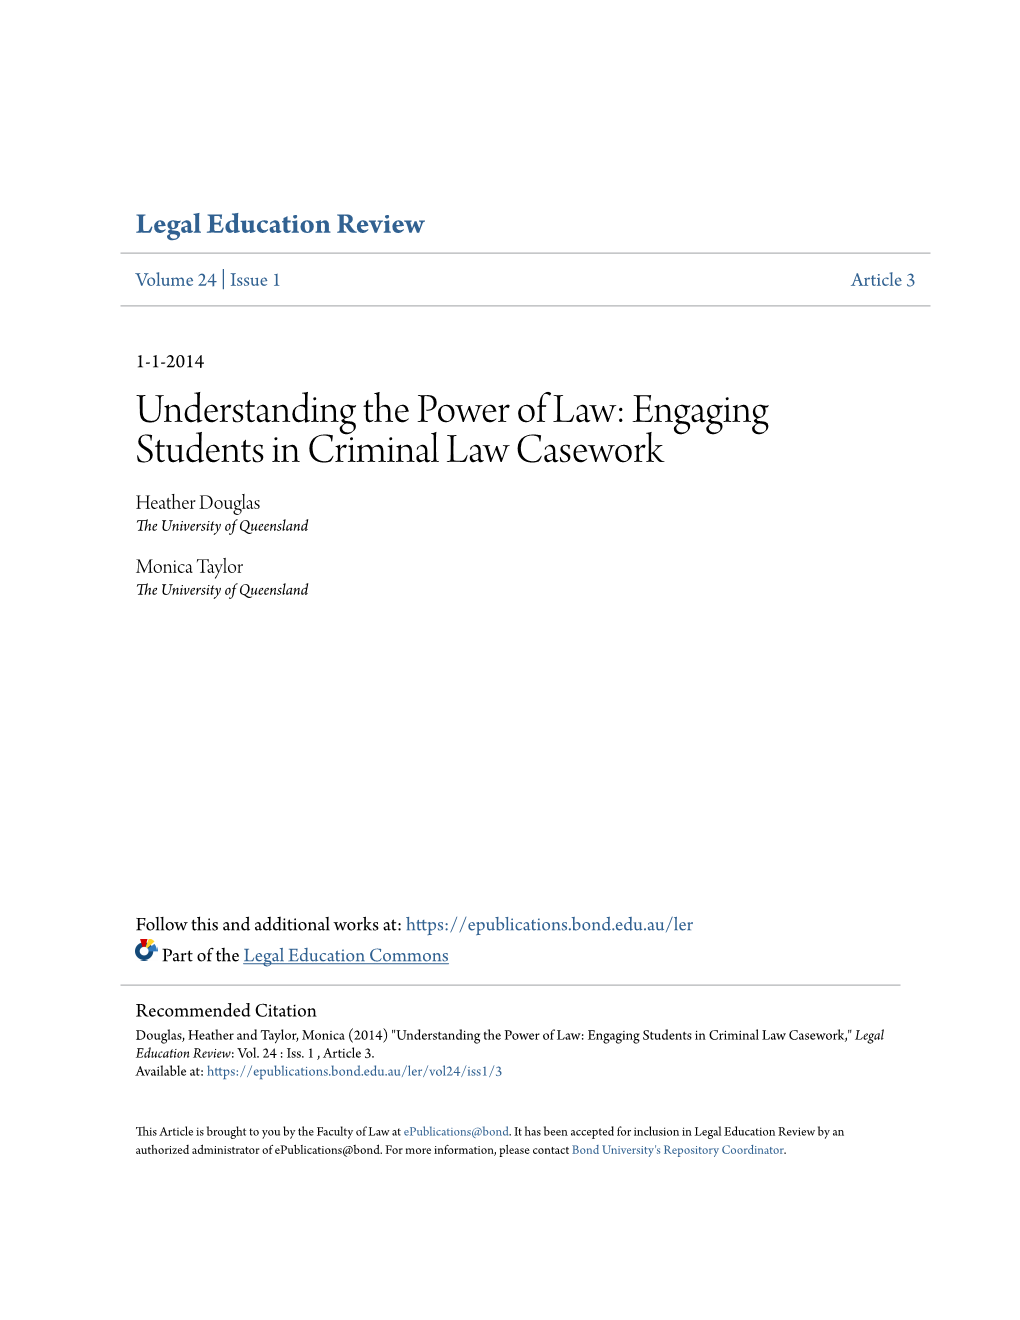 Engaging Students in Criminal Law Casework Heather Douglas the University of Queensland